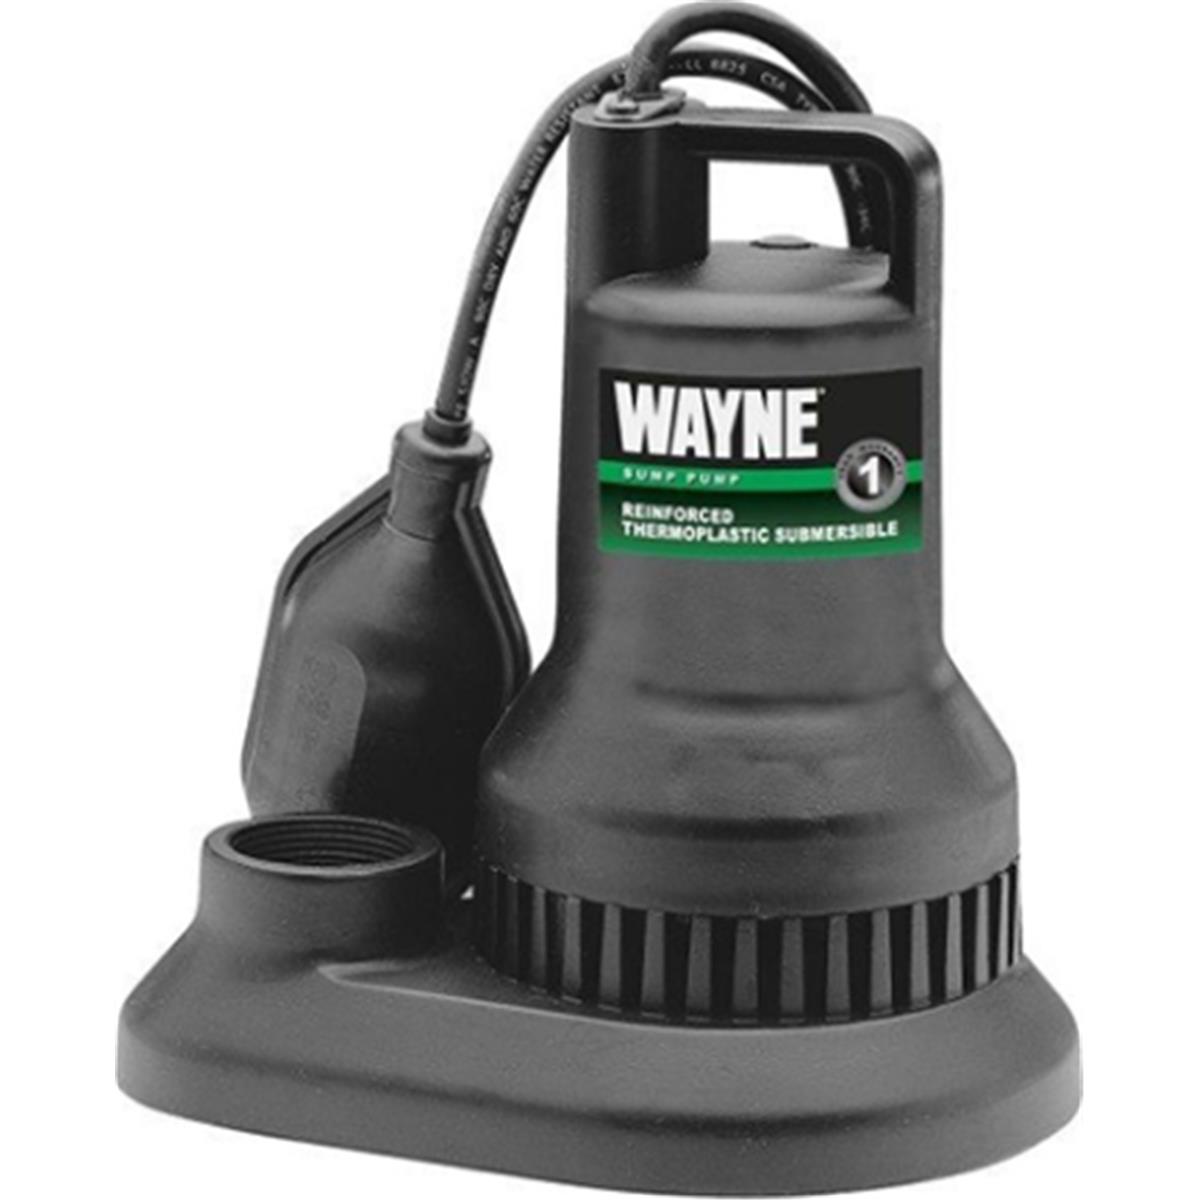 Wst33 0.33 Hp Plastic Submersible Sump Pump